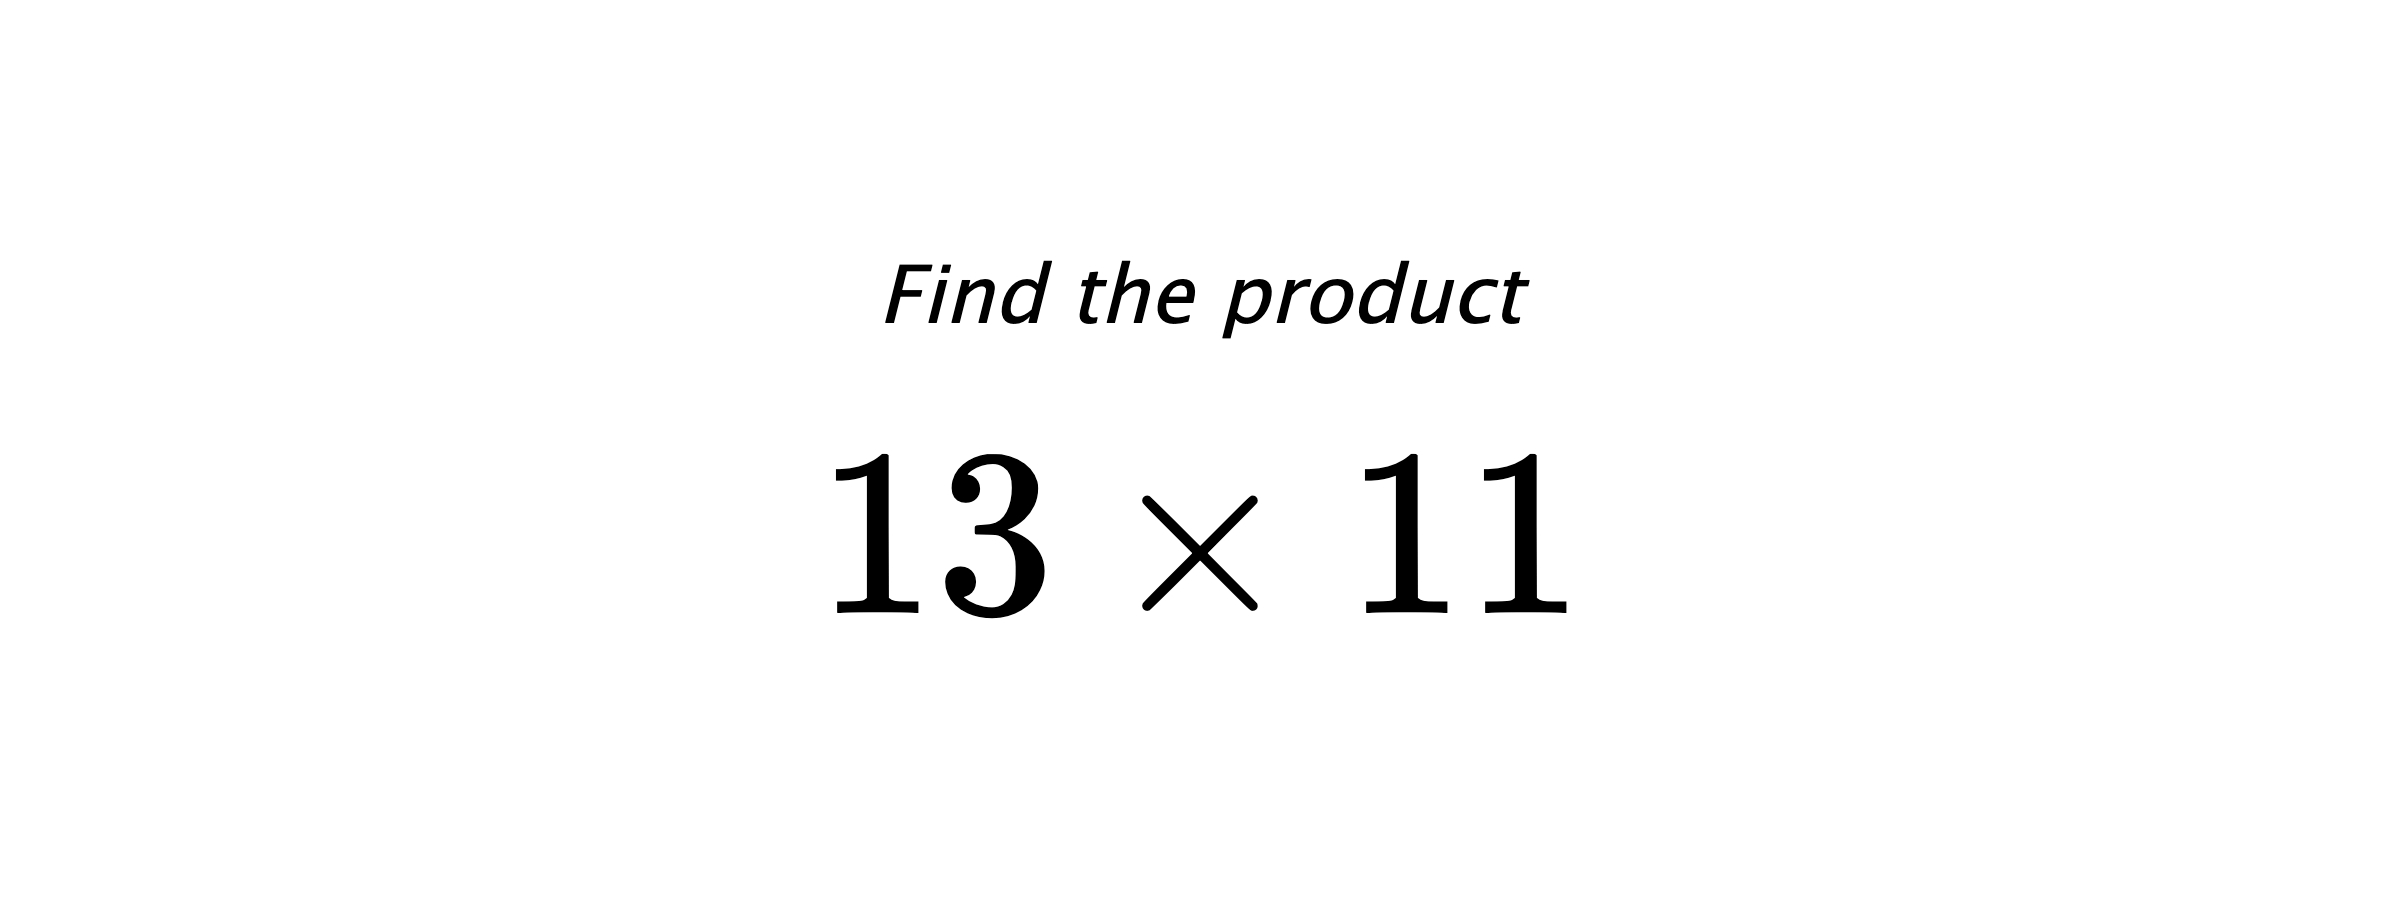 Find the product $ 13 \times 11 $